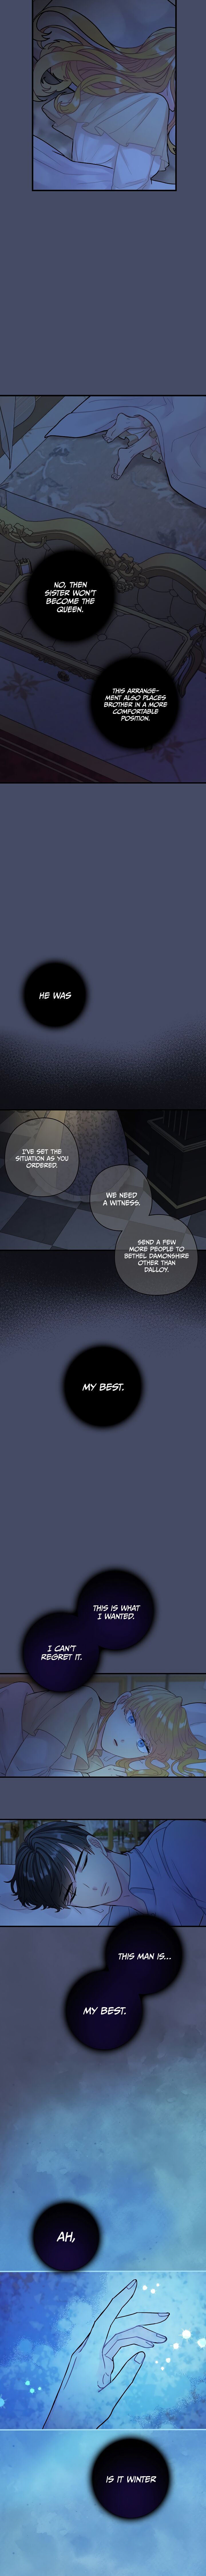 The Flower Dance and the Wind Song Chapter 23 page 6